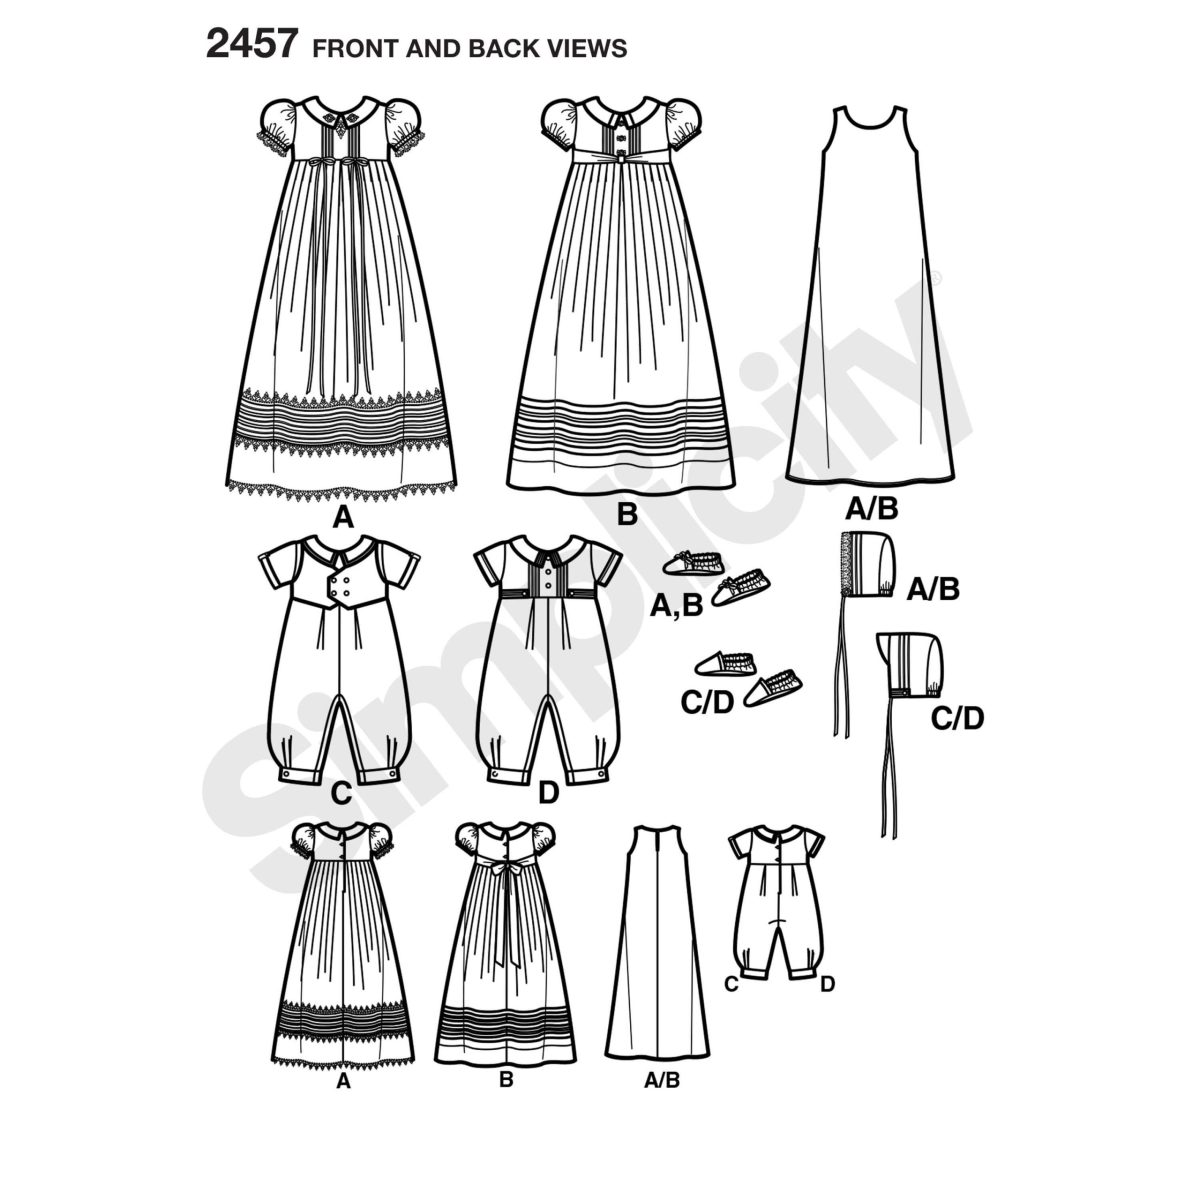 Simplicity Sewing Pattern 2457 Babies' Special Occasion